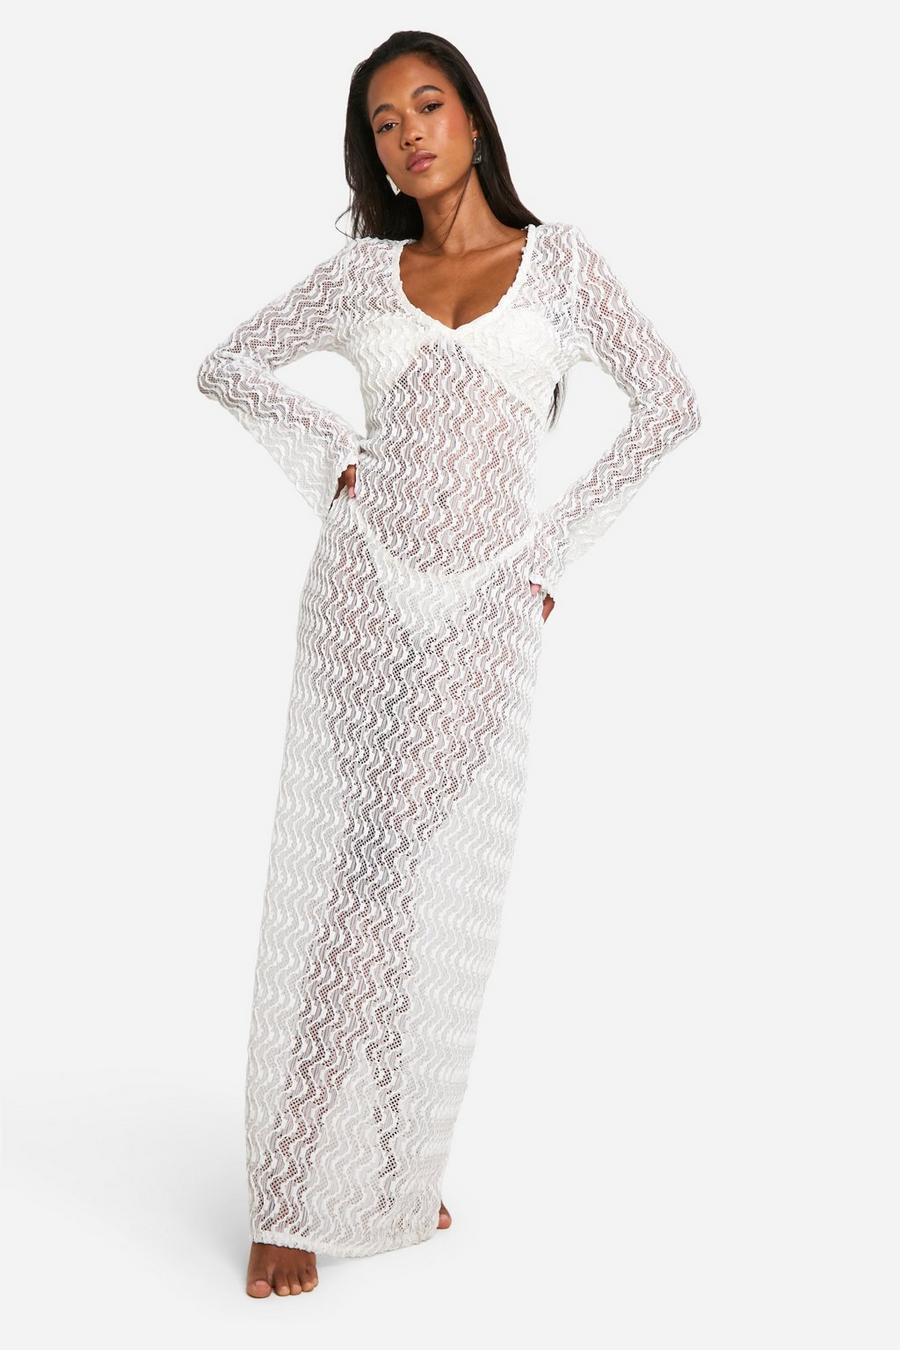 White Textured Lace Beach Maxi Cover-up Dress